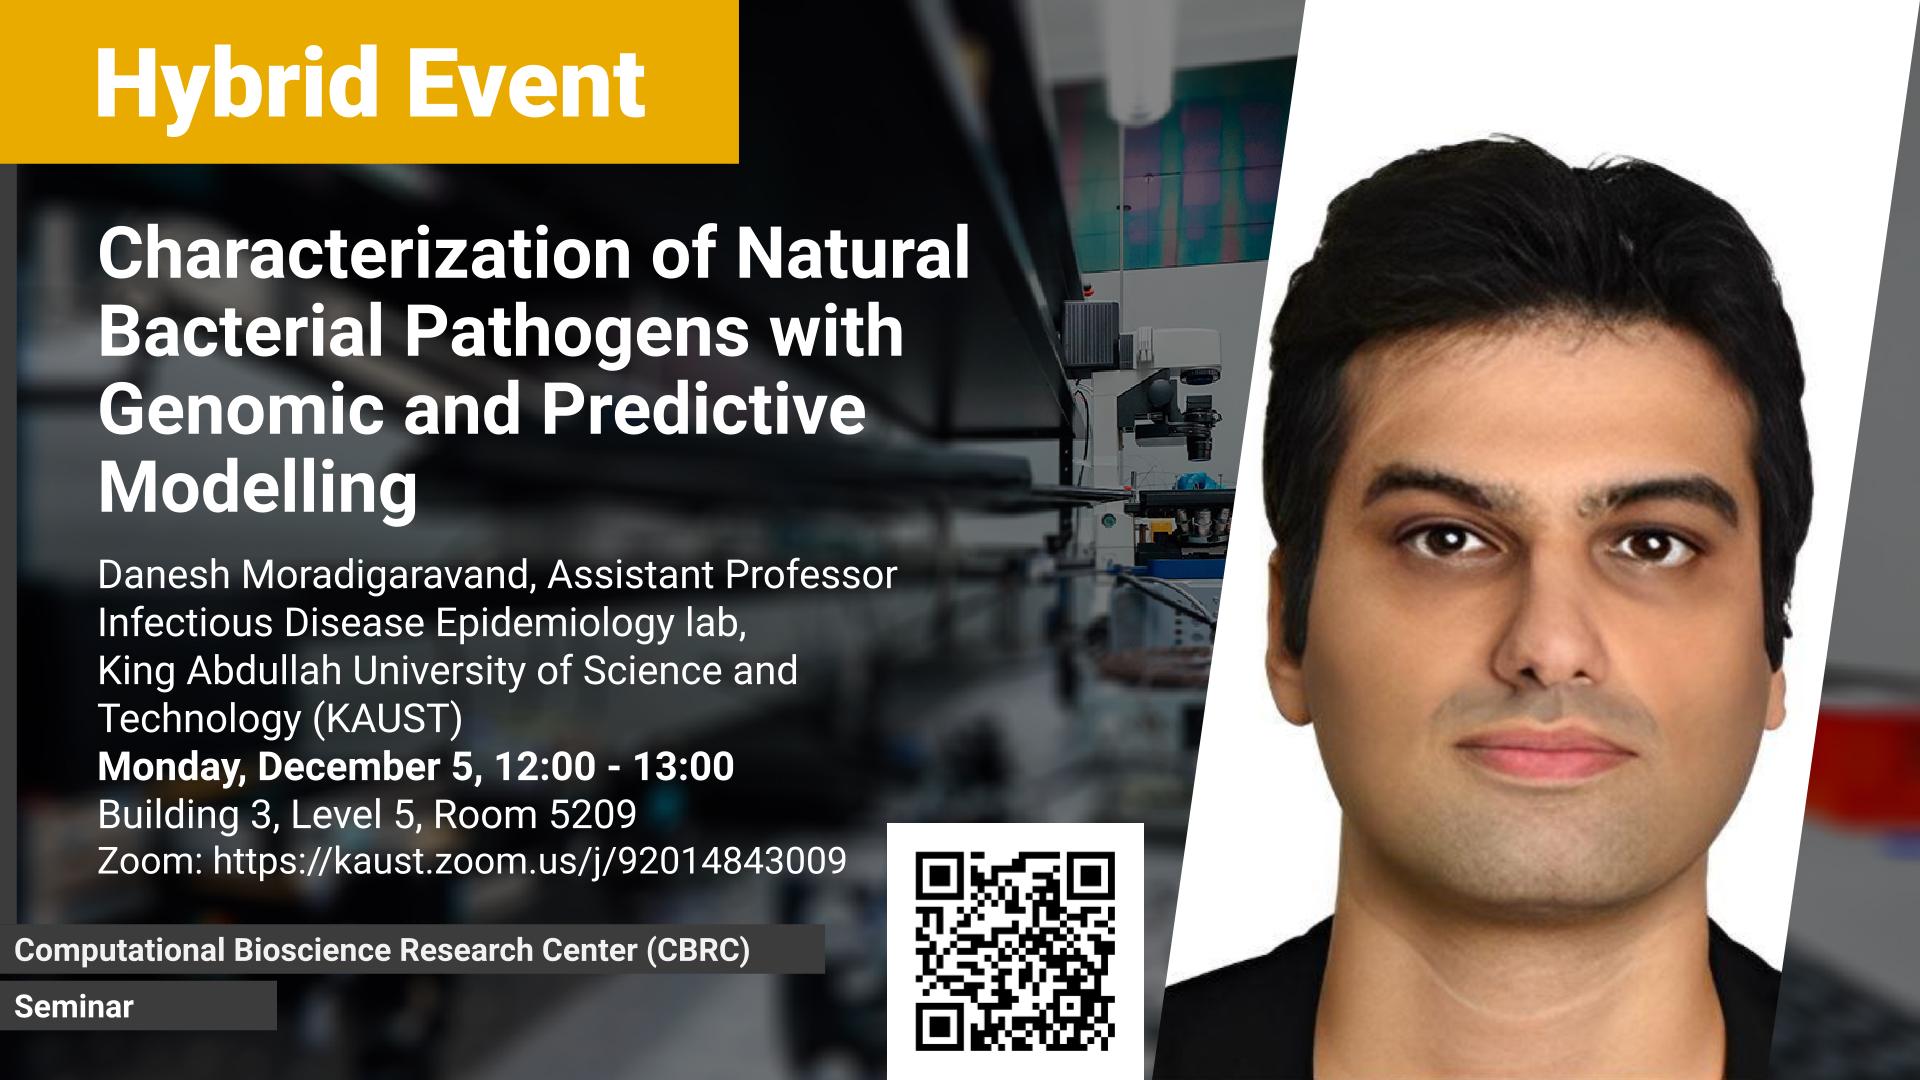 KAUST-CEMSE-CBRC-Seminar-Danesh-Moradigaravand-Characterization-of-Natural-Bacterial-Pathogens-with-Genomic-and-Predictive-Modelling